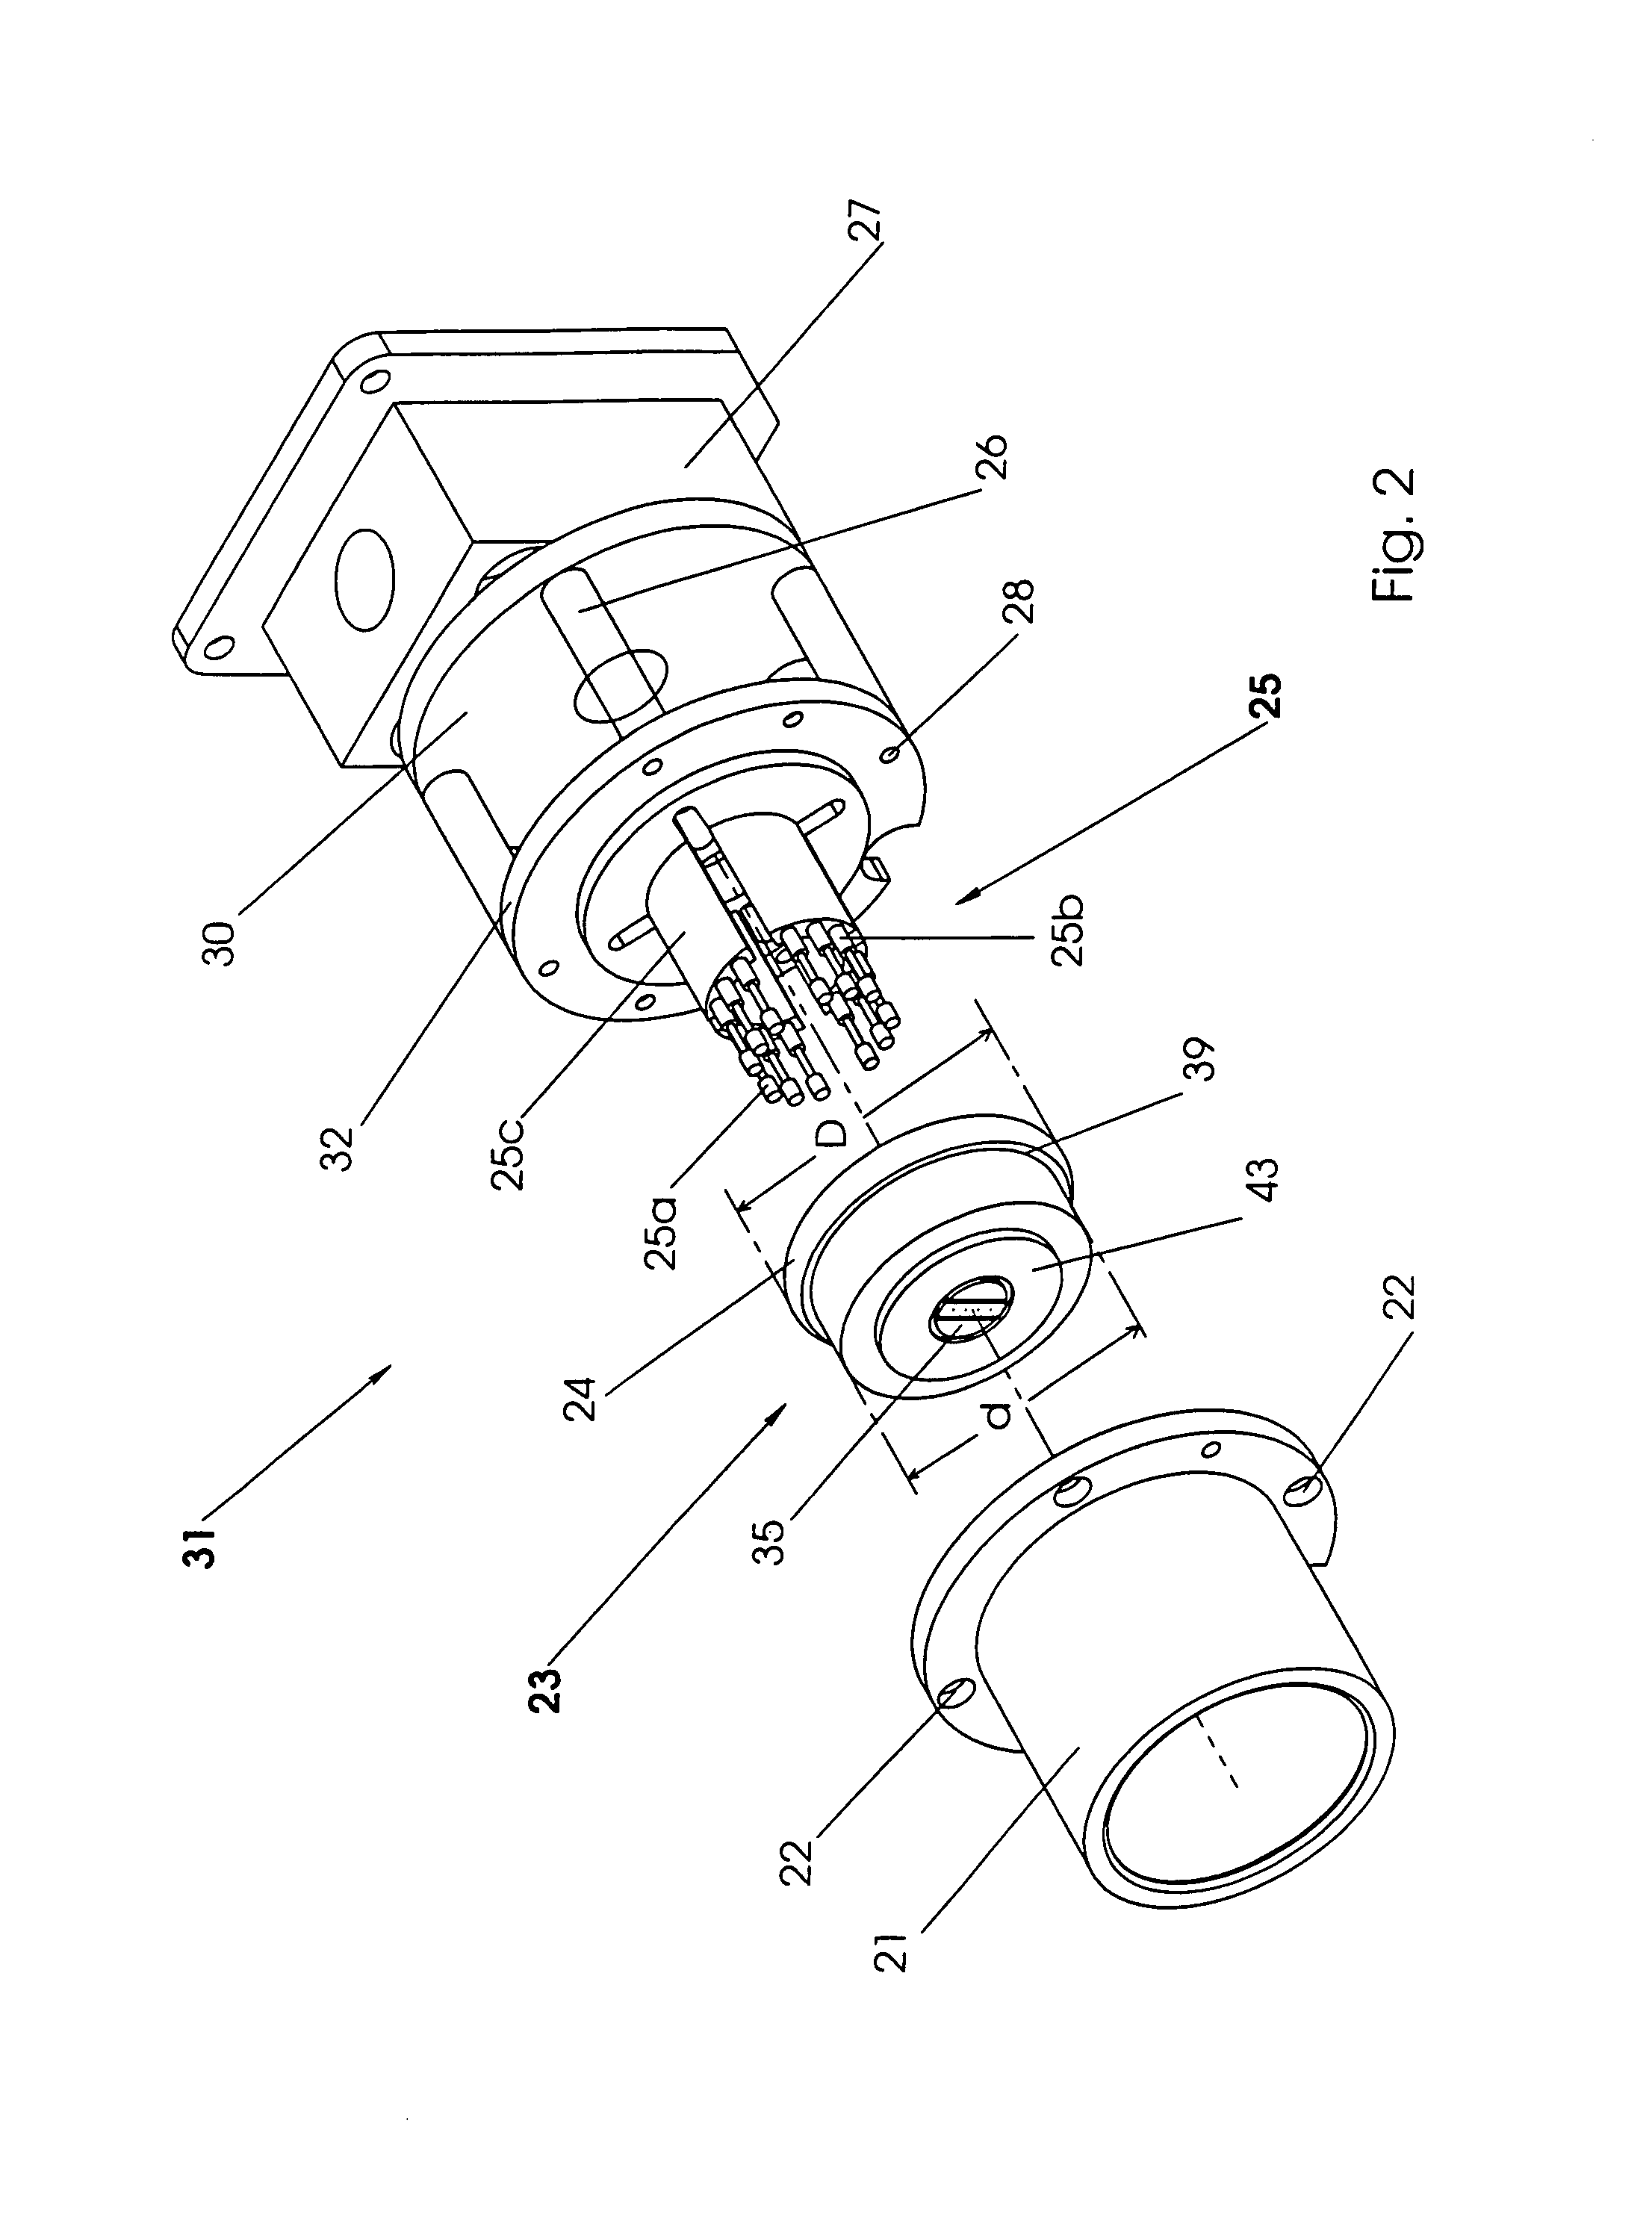 Automatic mercury probe for use with a semiconductor wafer